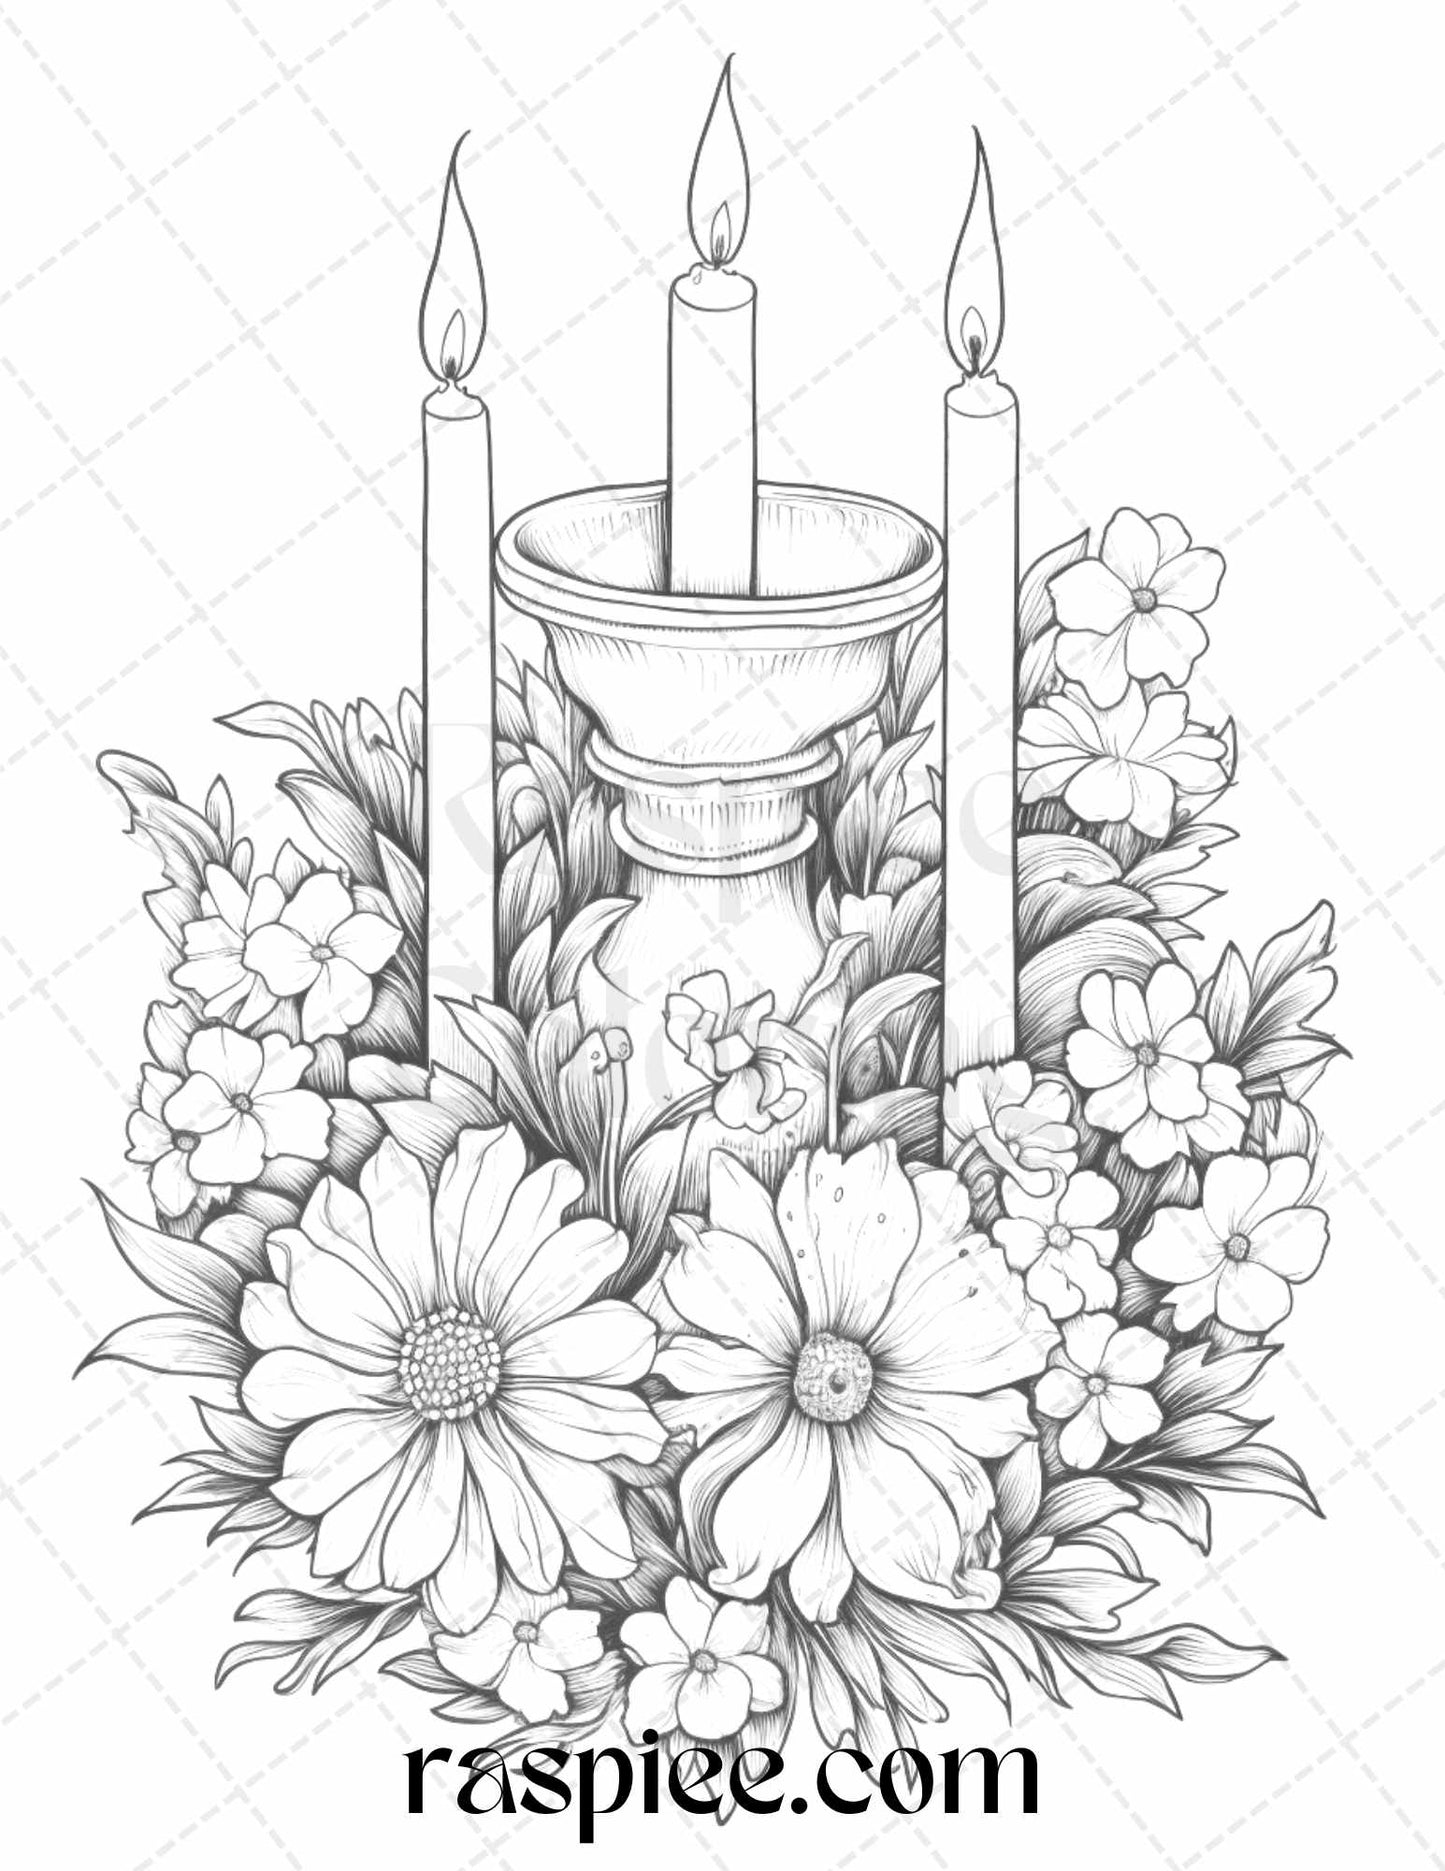 40 Flower Candles Grayscale Coloring Pages Printable for Adults, PDF File Instant Download - Raspiee Coloring